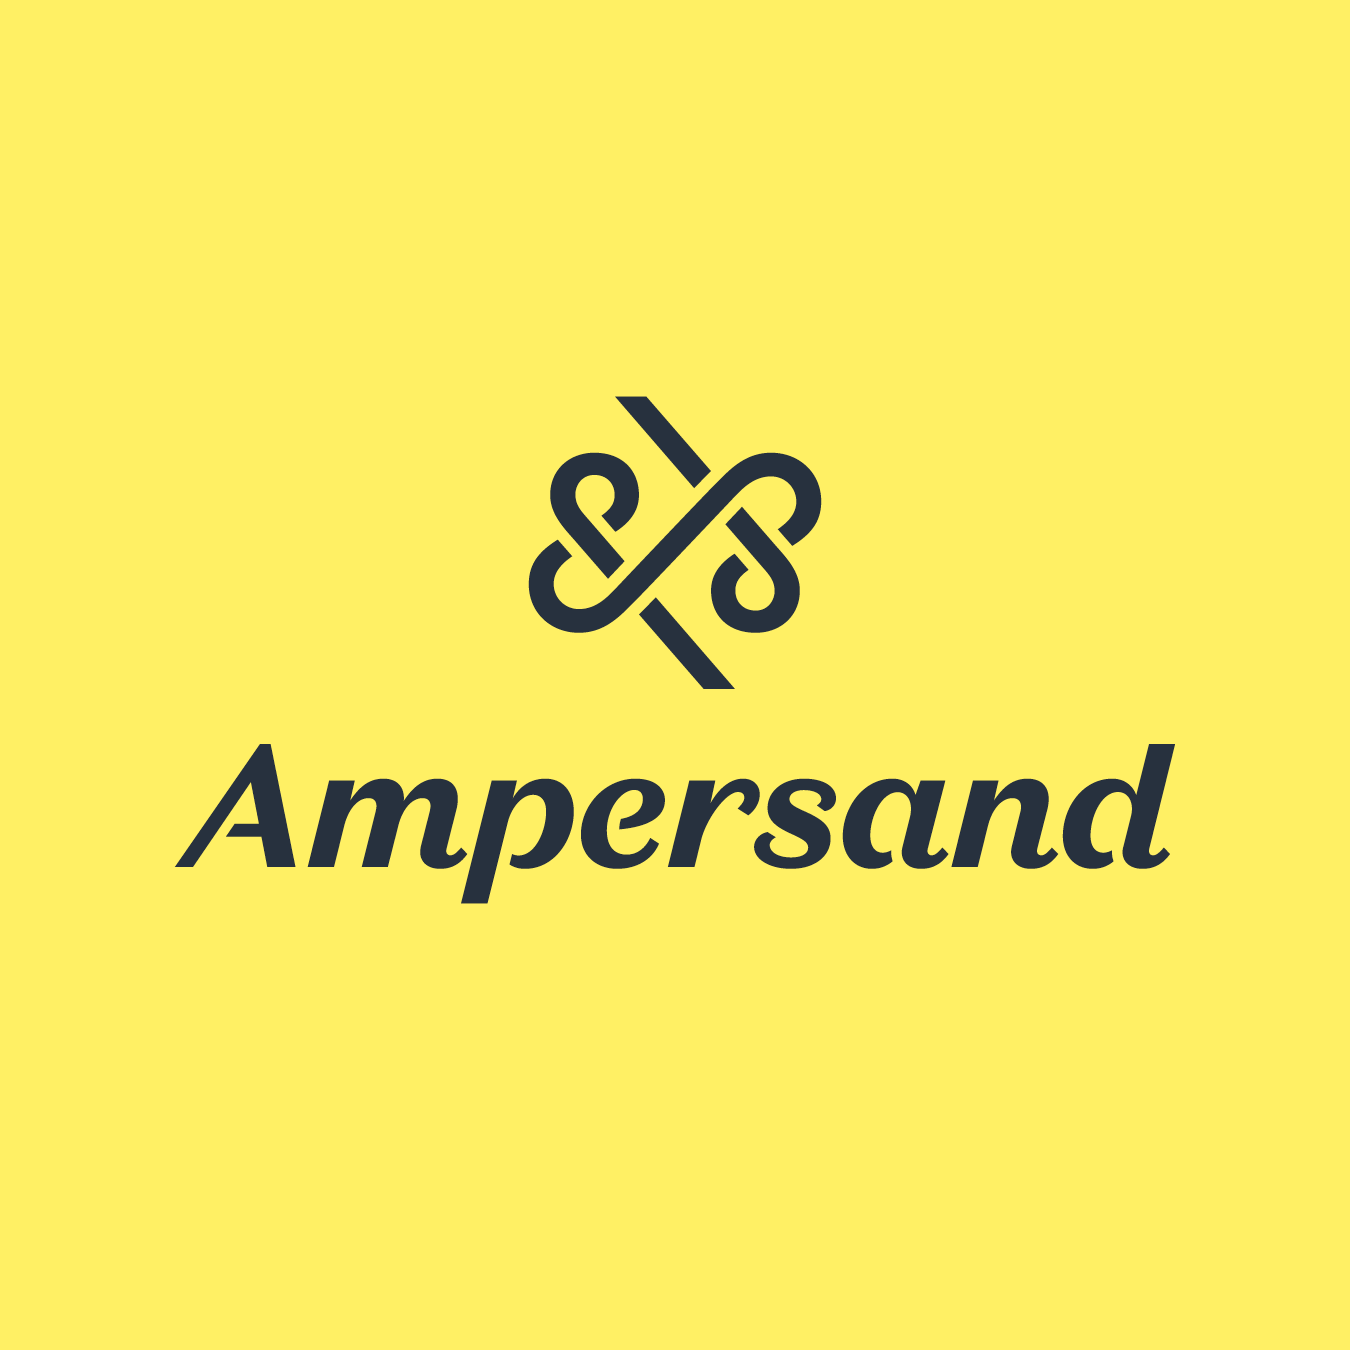 Ampersand logo and typography.